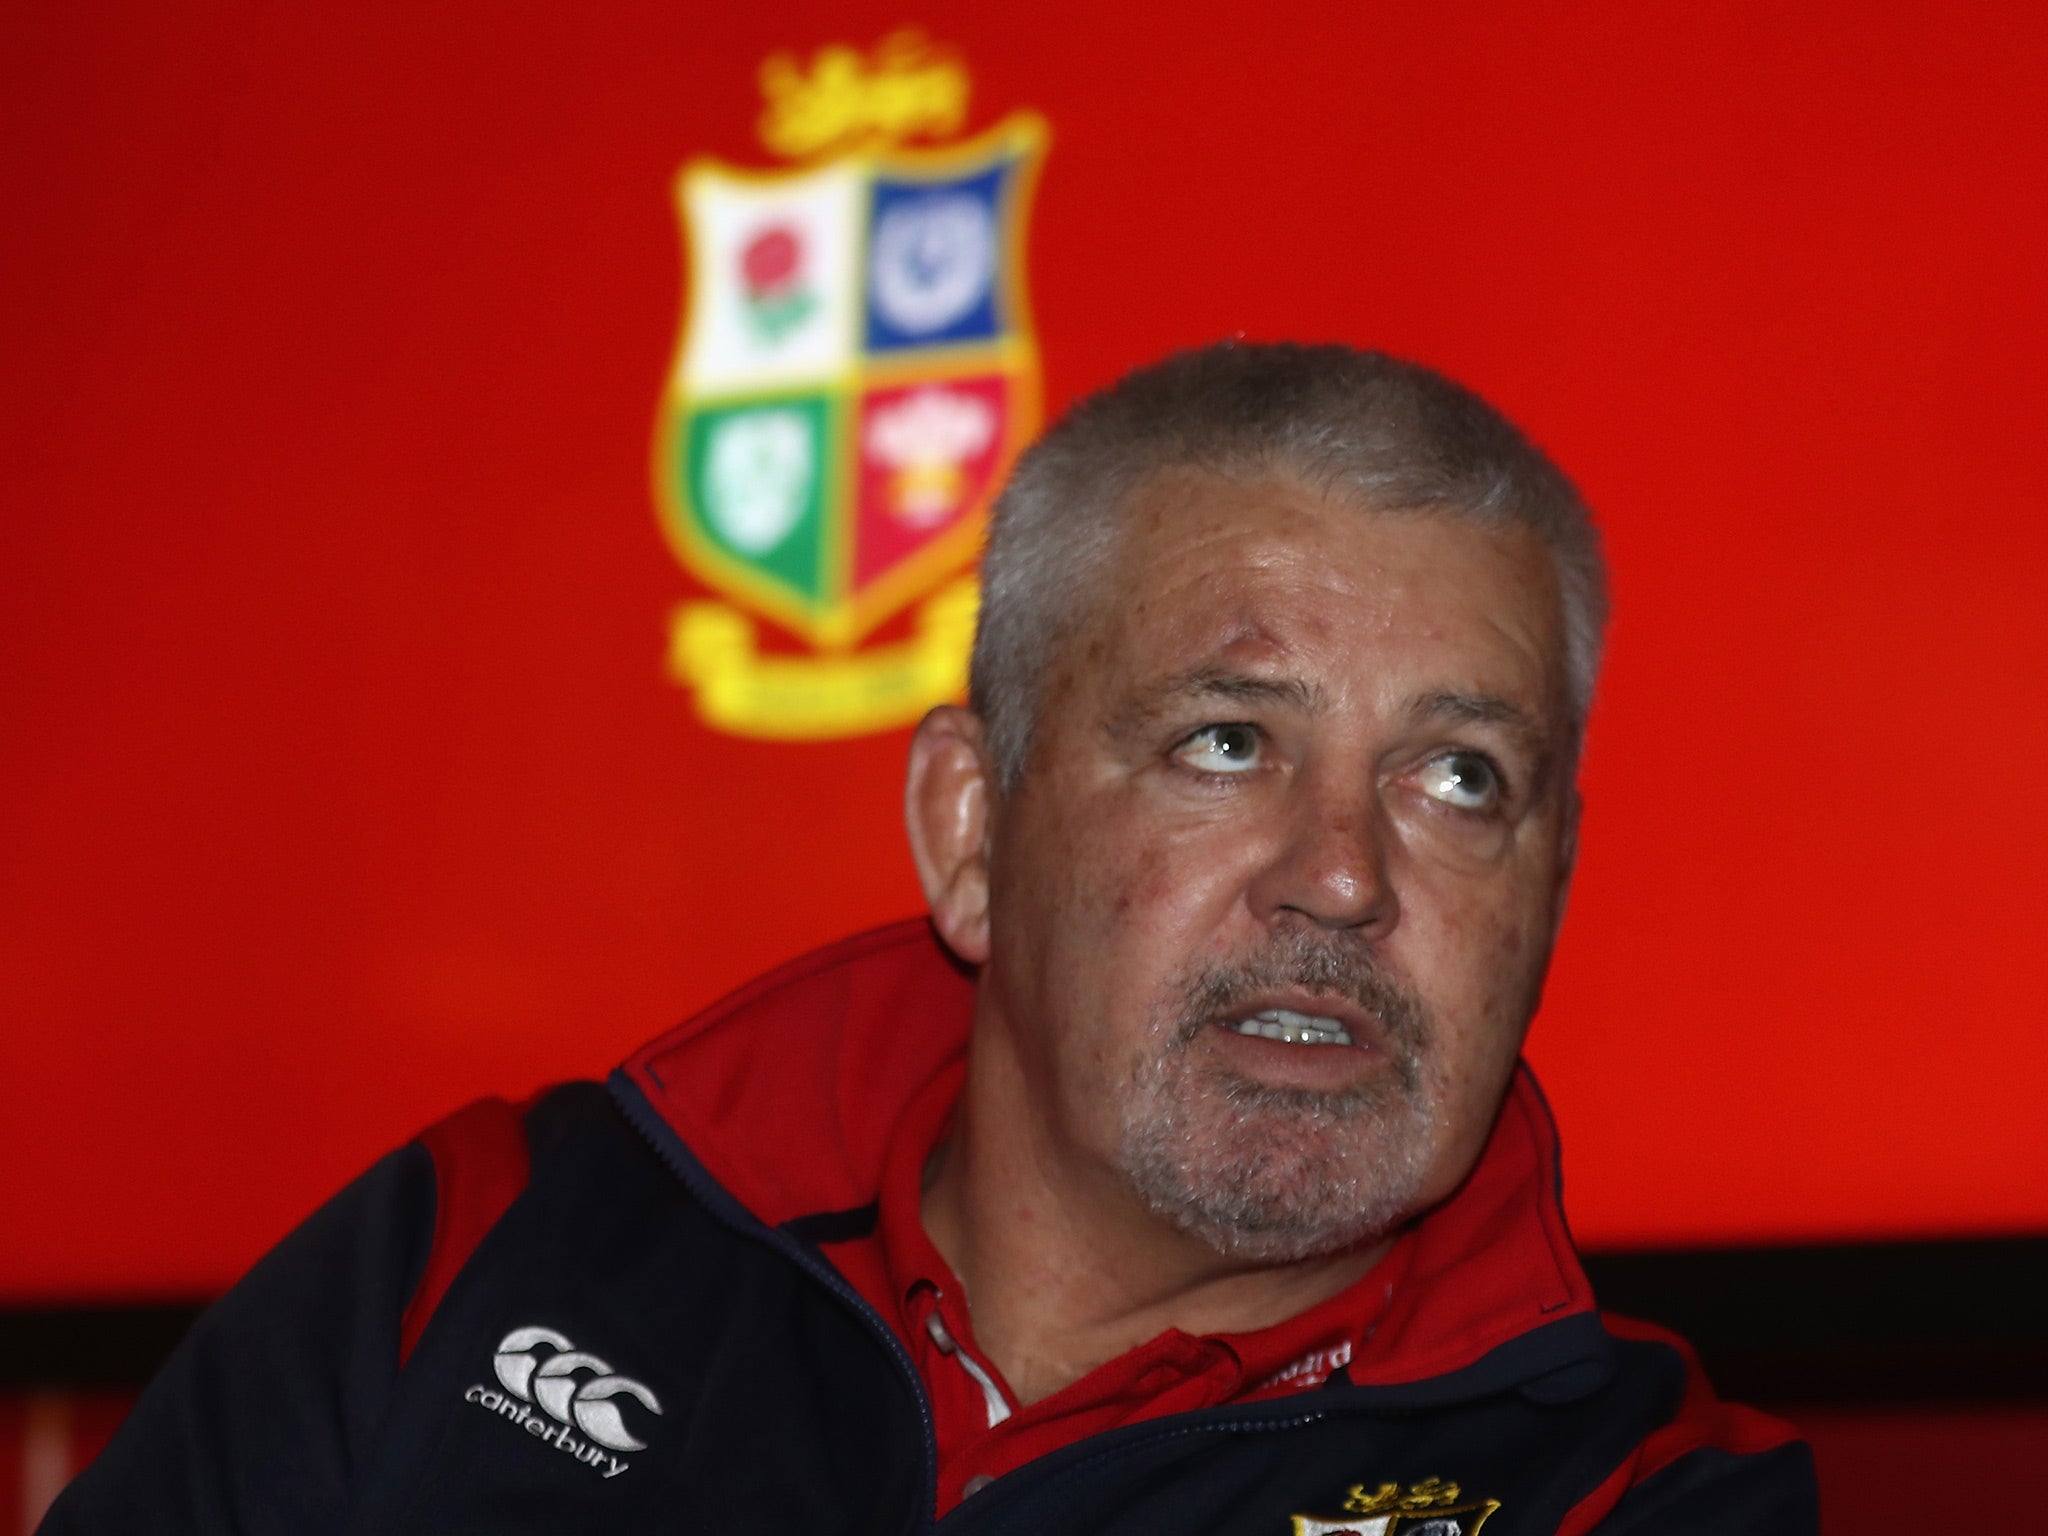 Warren Gatland will announce his selection in less than a month